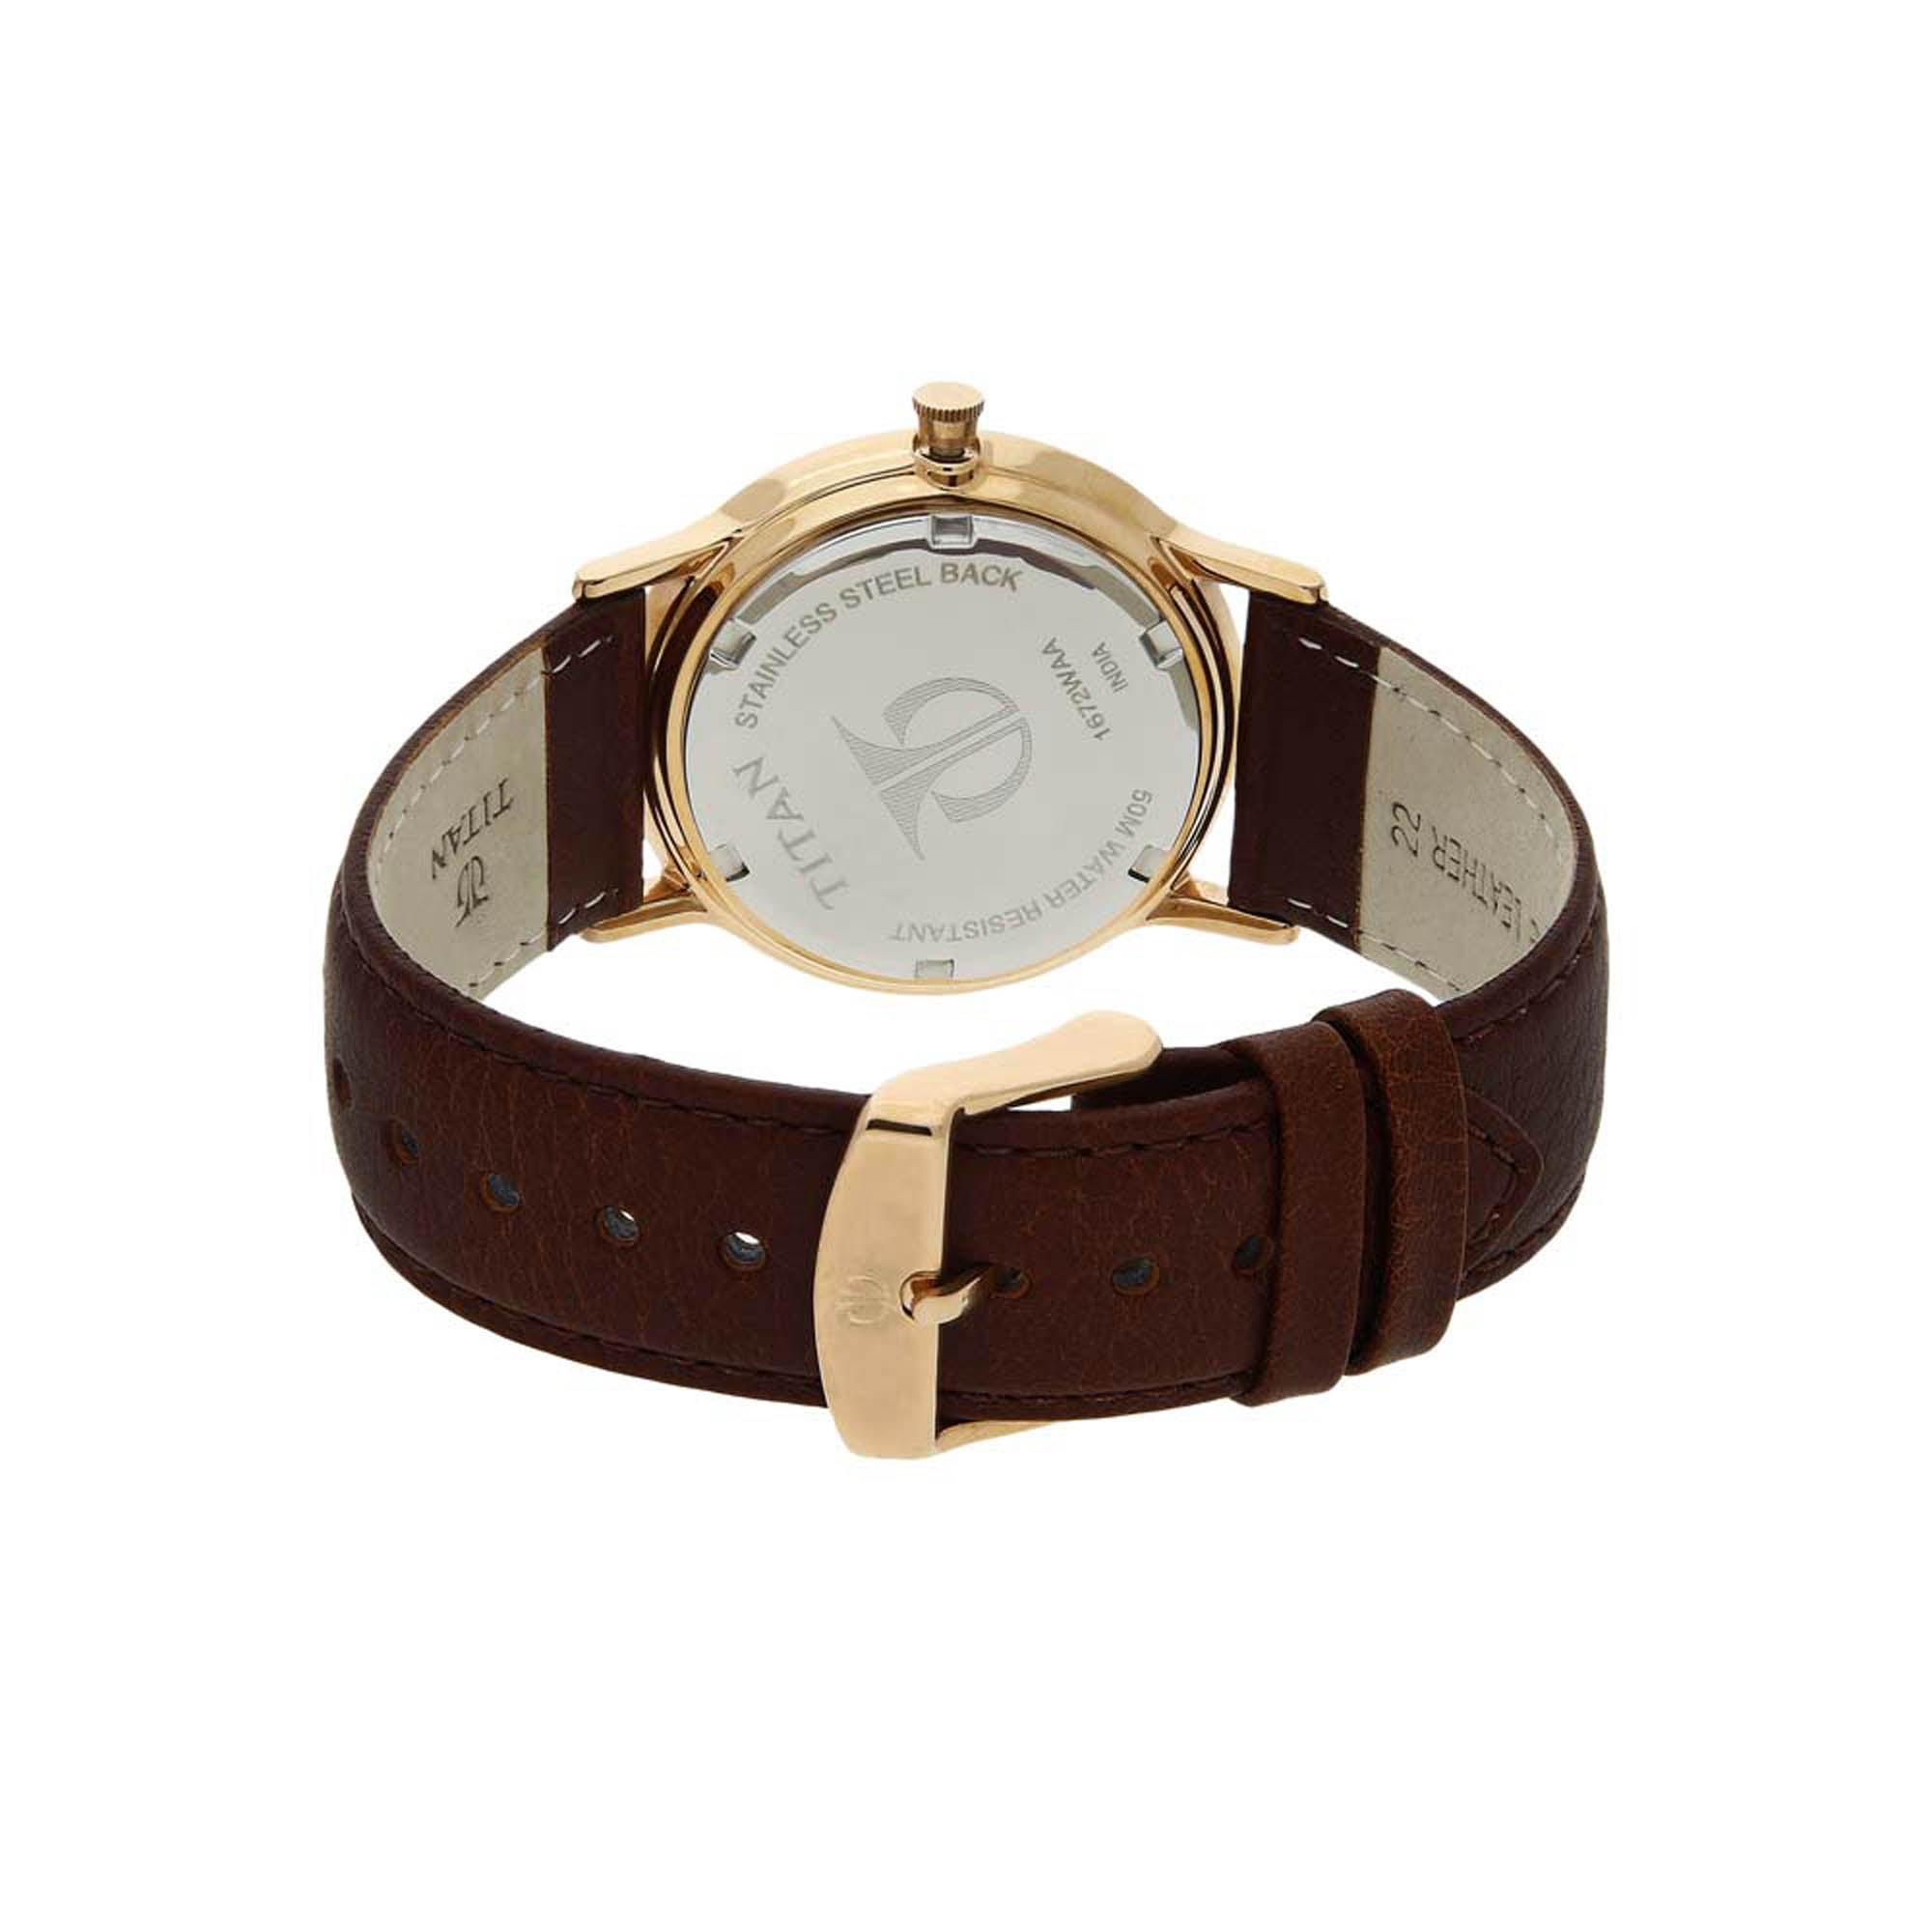 Titan Champagne Dial Analog Leather Strap watch for Men